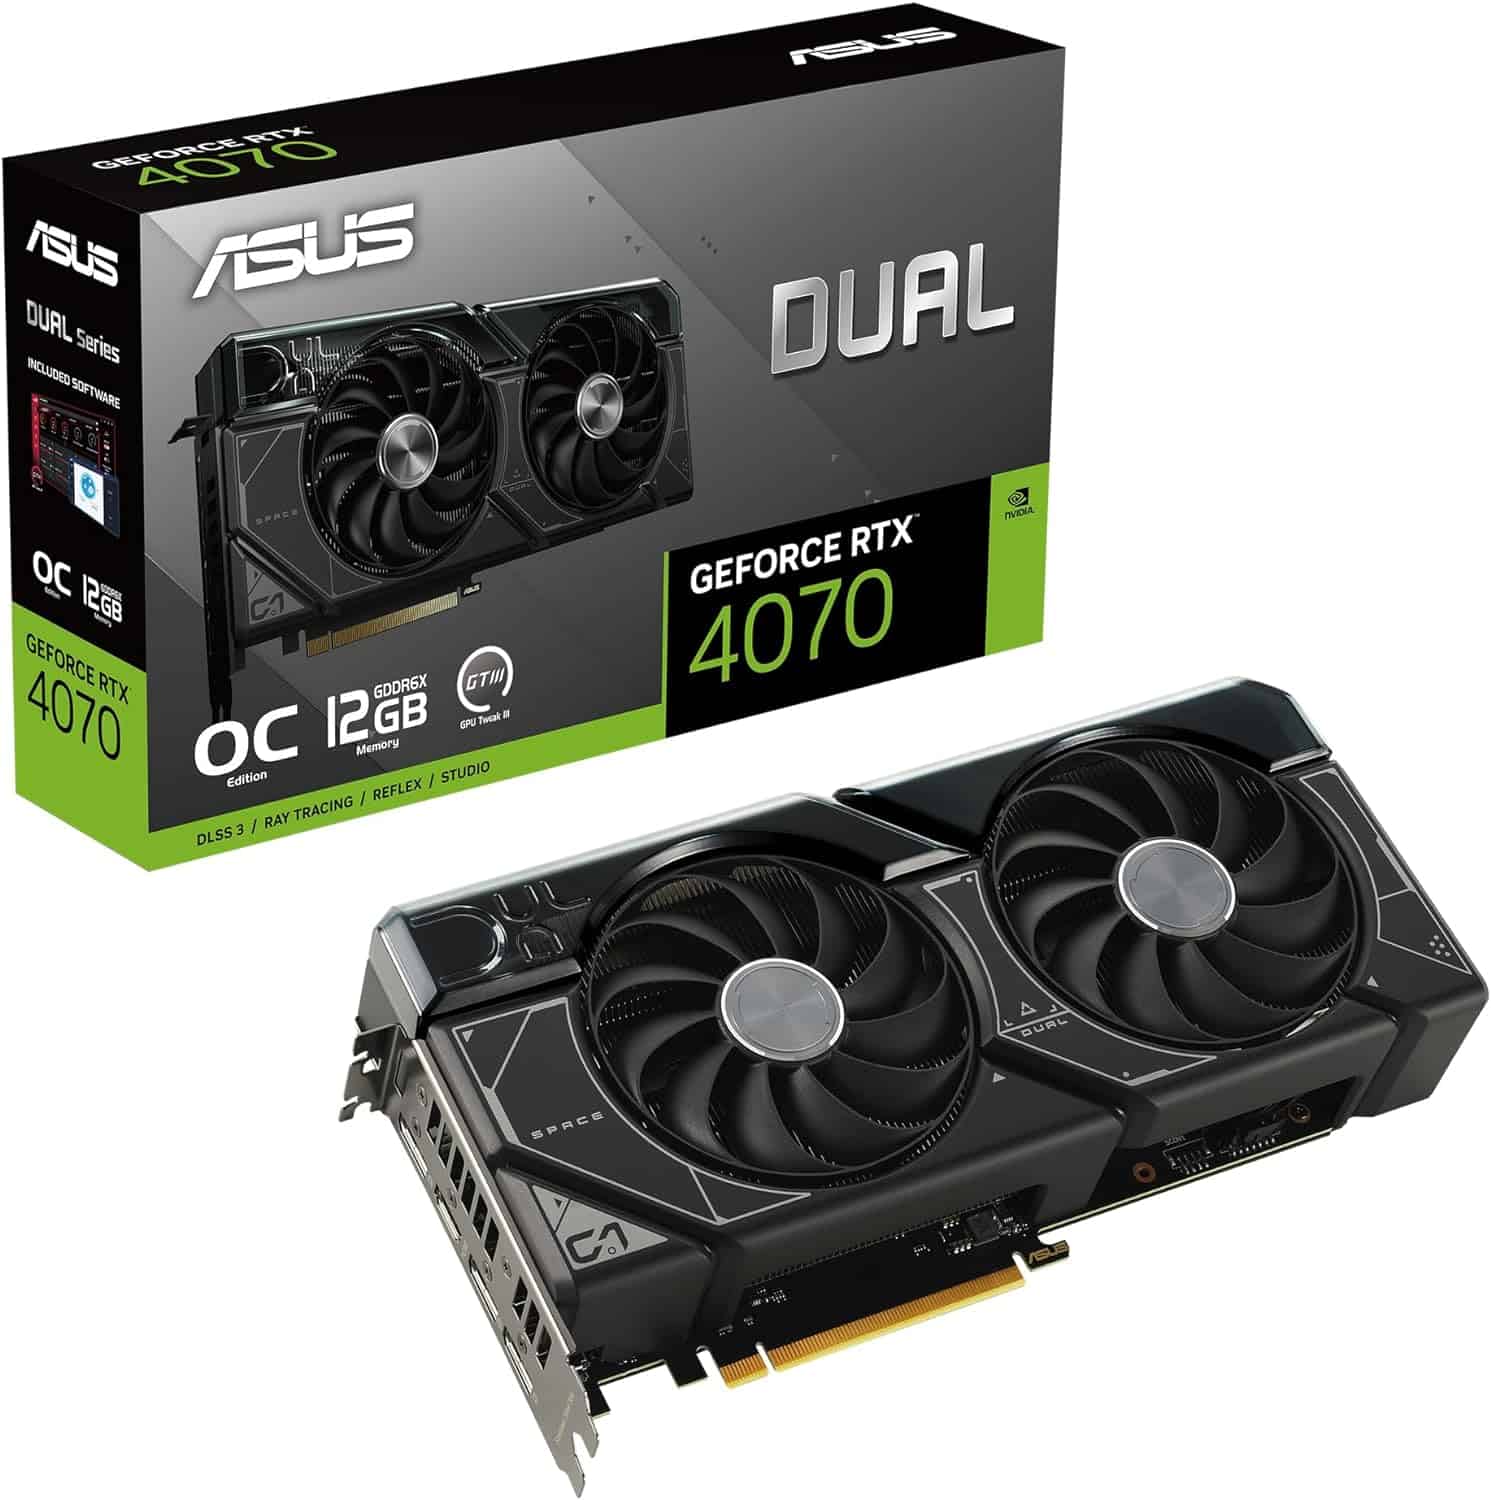 The ASUS GeForce GTX 770 Dual GTX 770 is a powerful graphics card that offers exceptional performance.